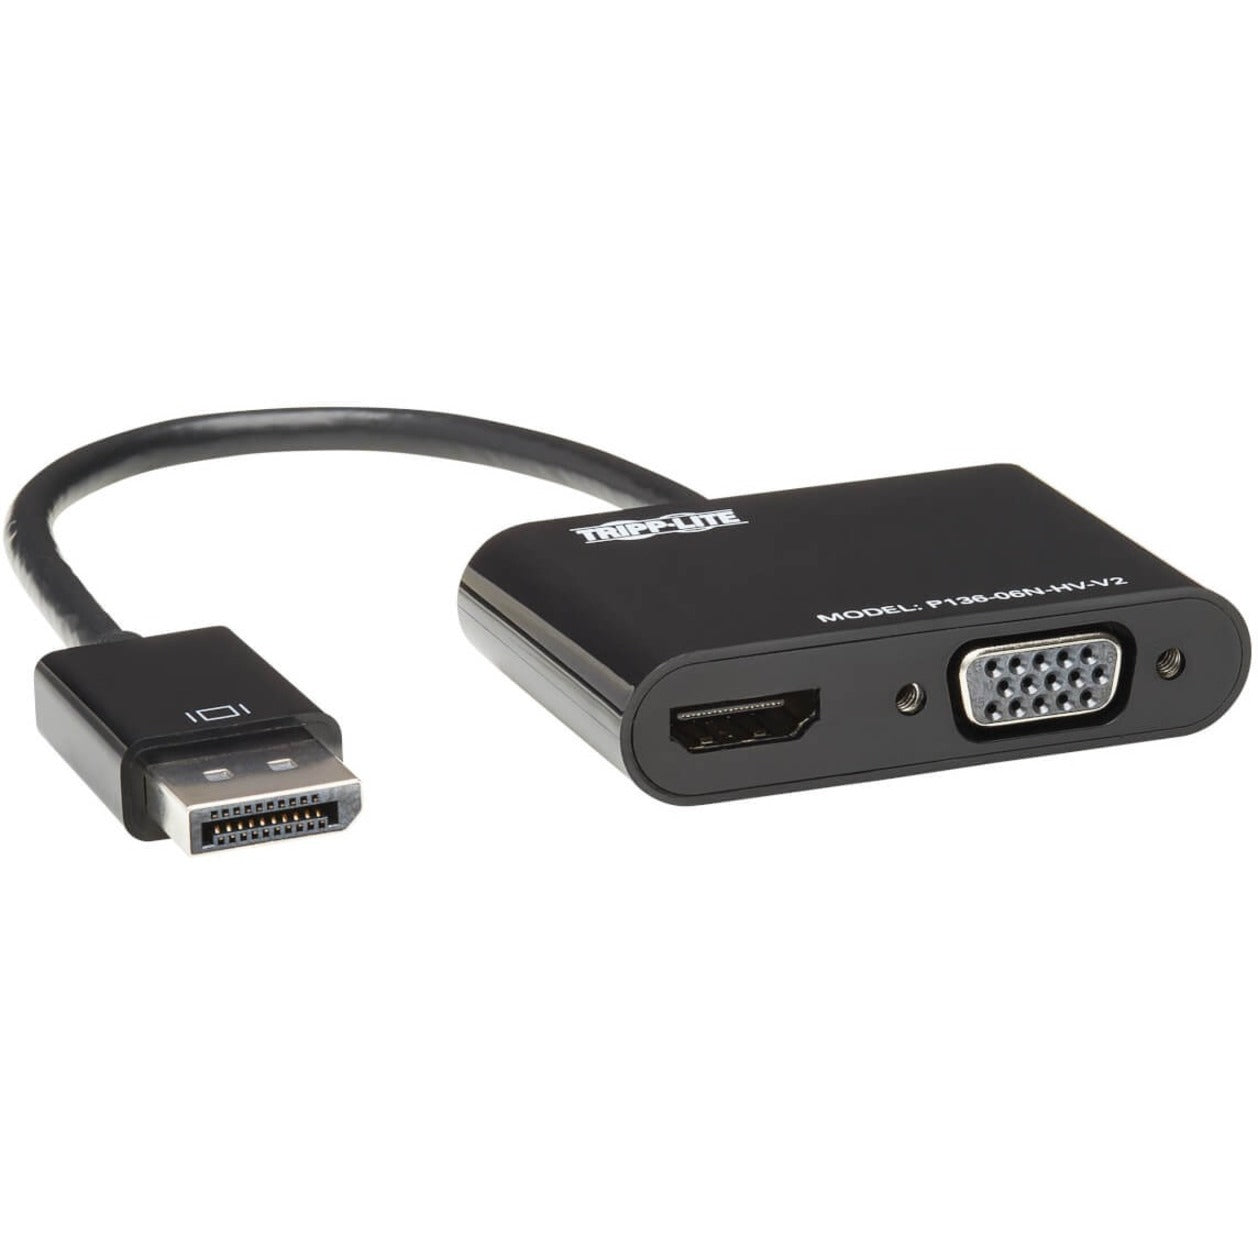 Tripp Lite P136-06N-HV-V2 DisplayPort 1.2 to VGA/HDMI All-in-One Converter Adapter, 4K x 2K HDMI Cable